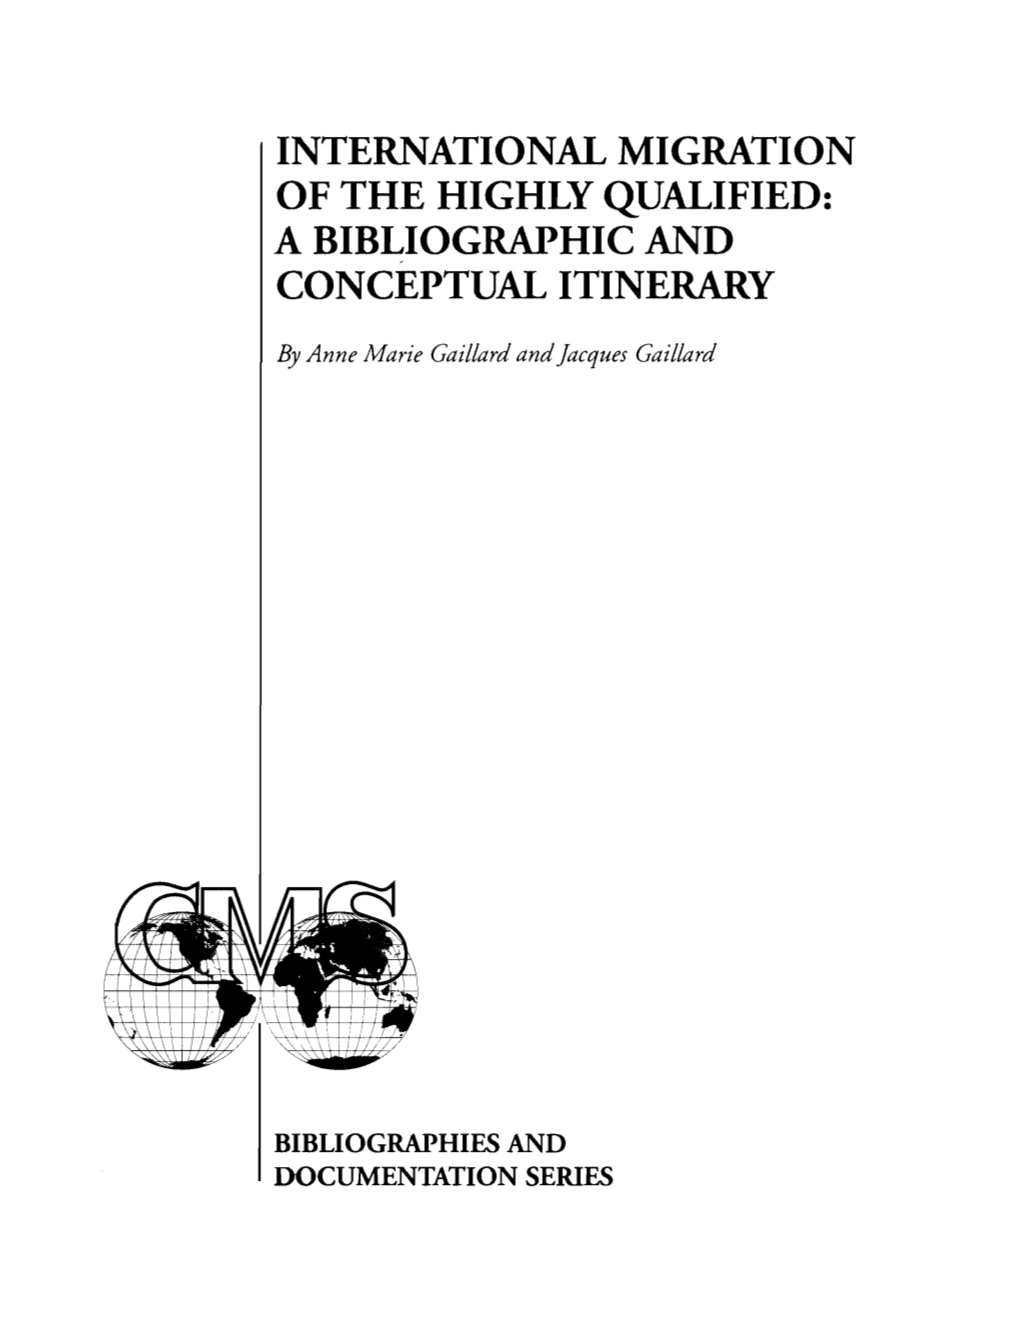 International Migration of the Highly Qualified : a Bibliographic And